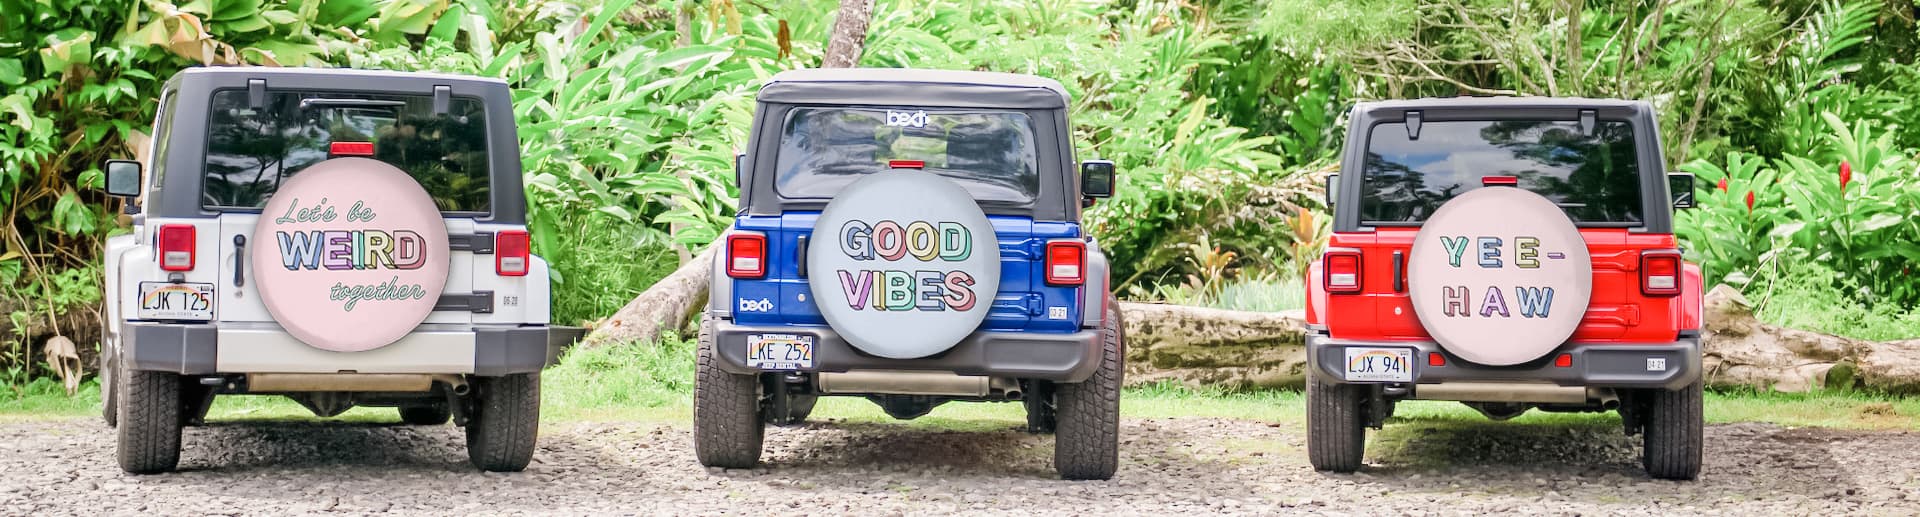 cute spare tire covers for jeep